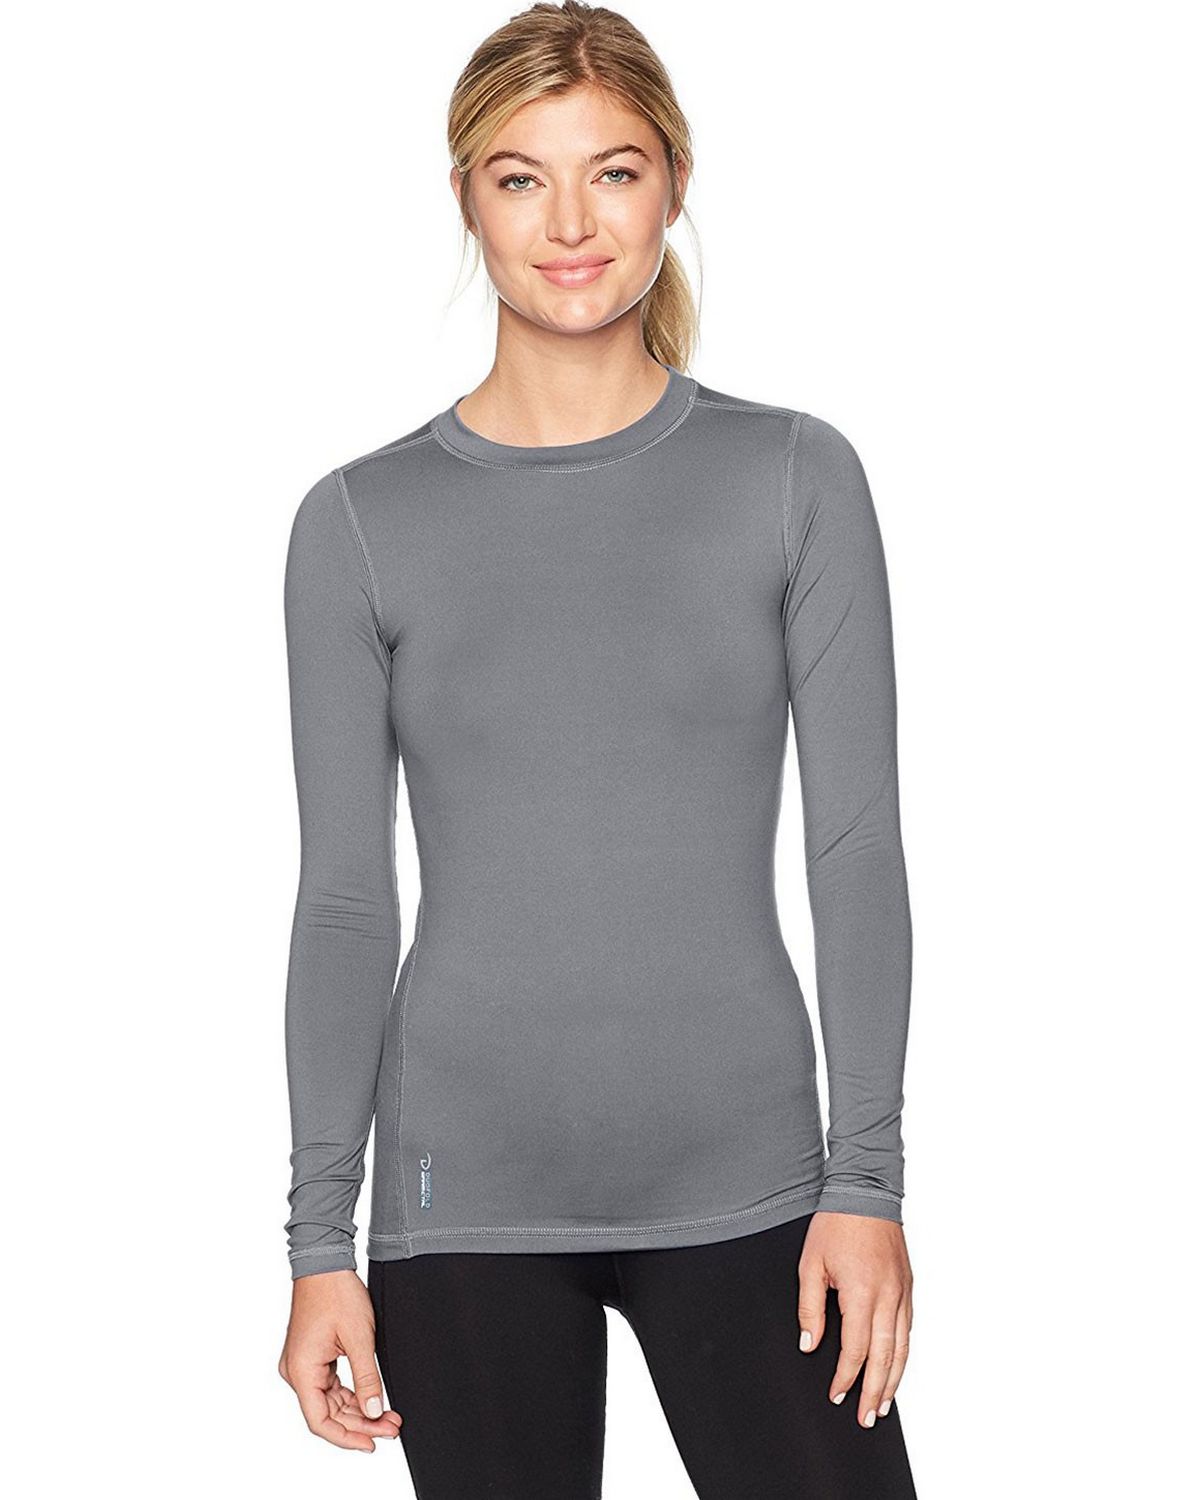 Duofold Womens Flex Weight Thermal Shirt Base Layer Top